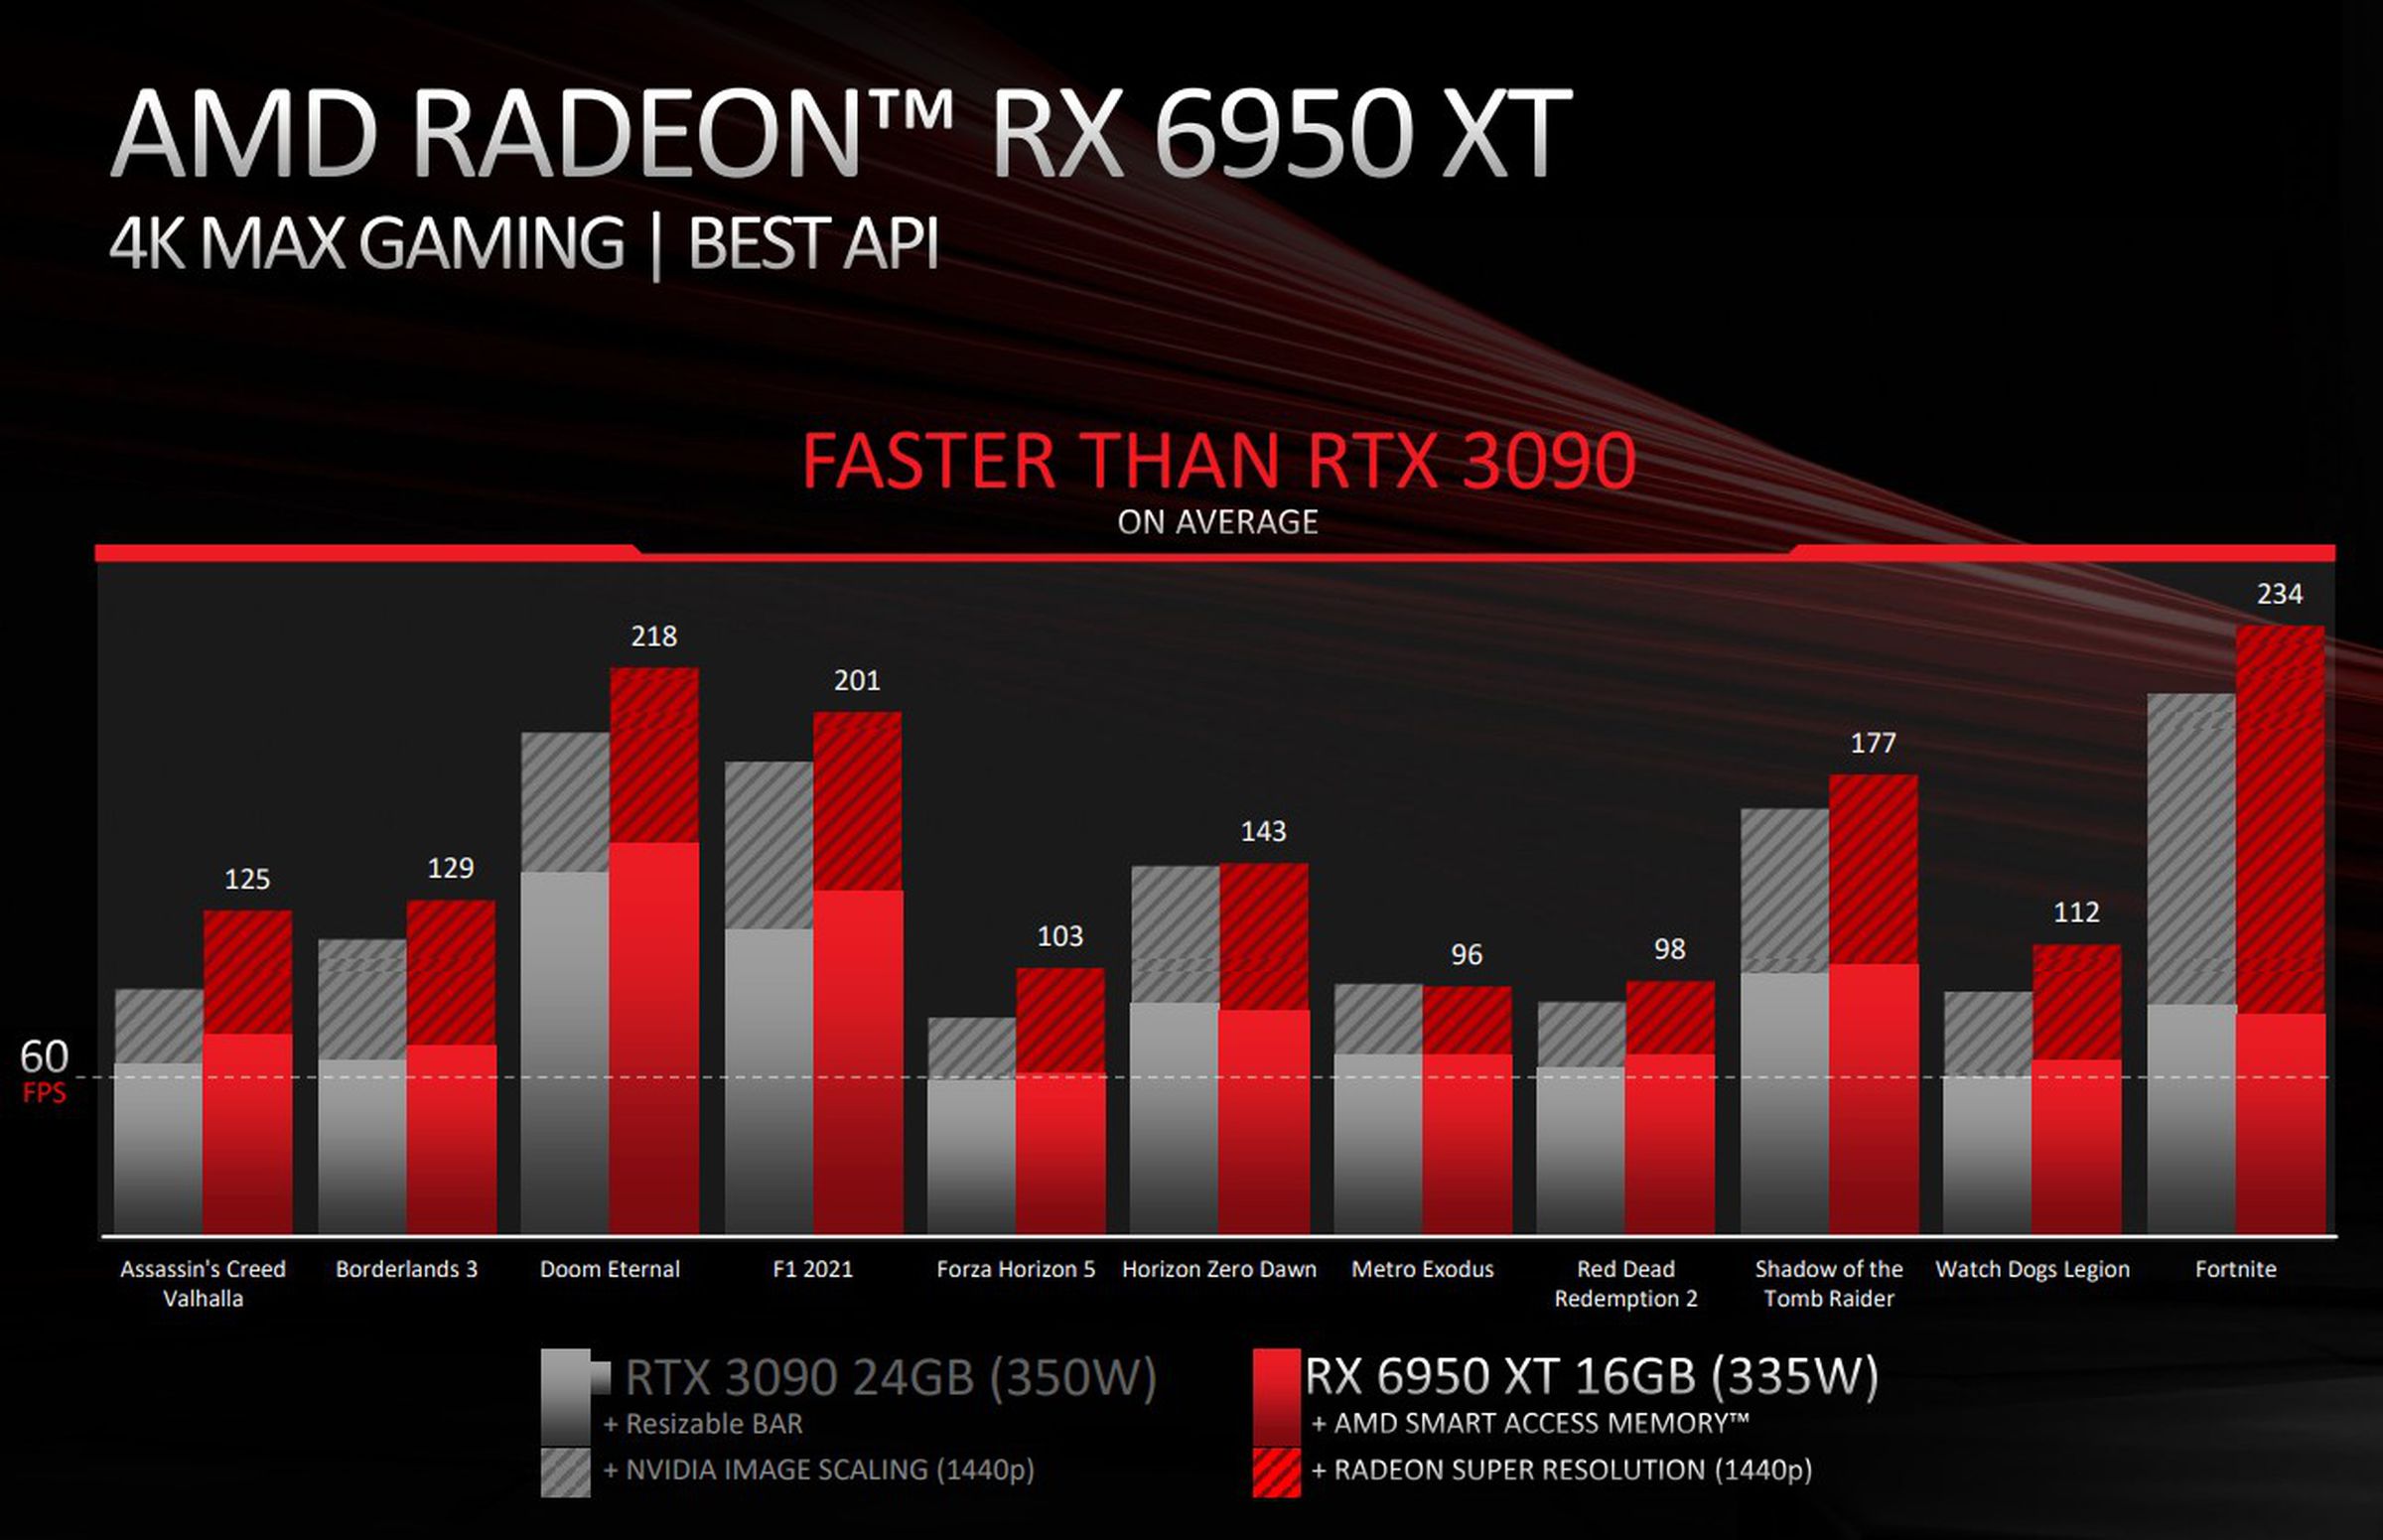 Note the striped area is with Radeon Super Resolution and Nvidia Image Scaling enabled.